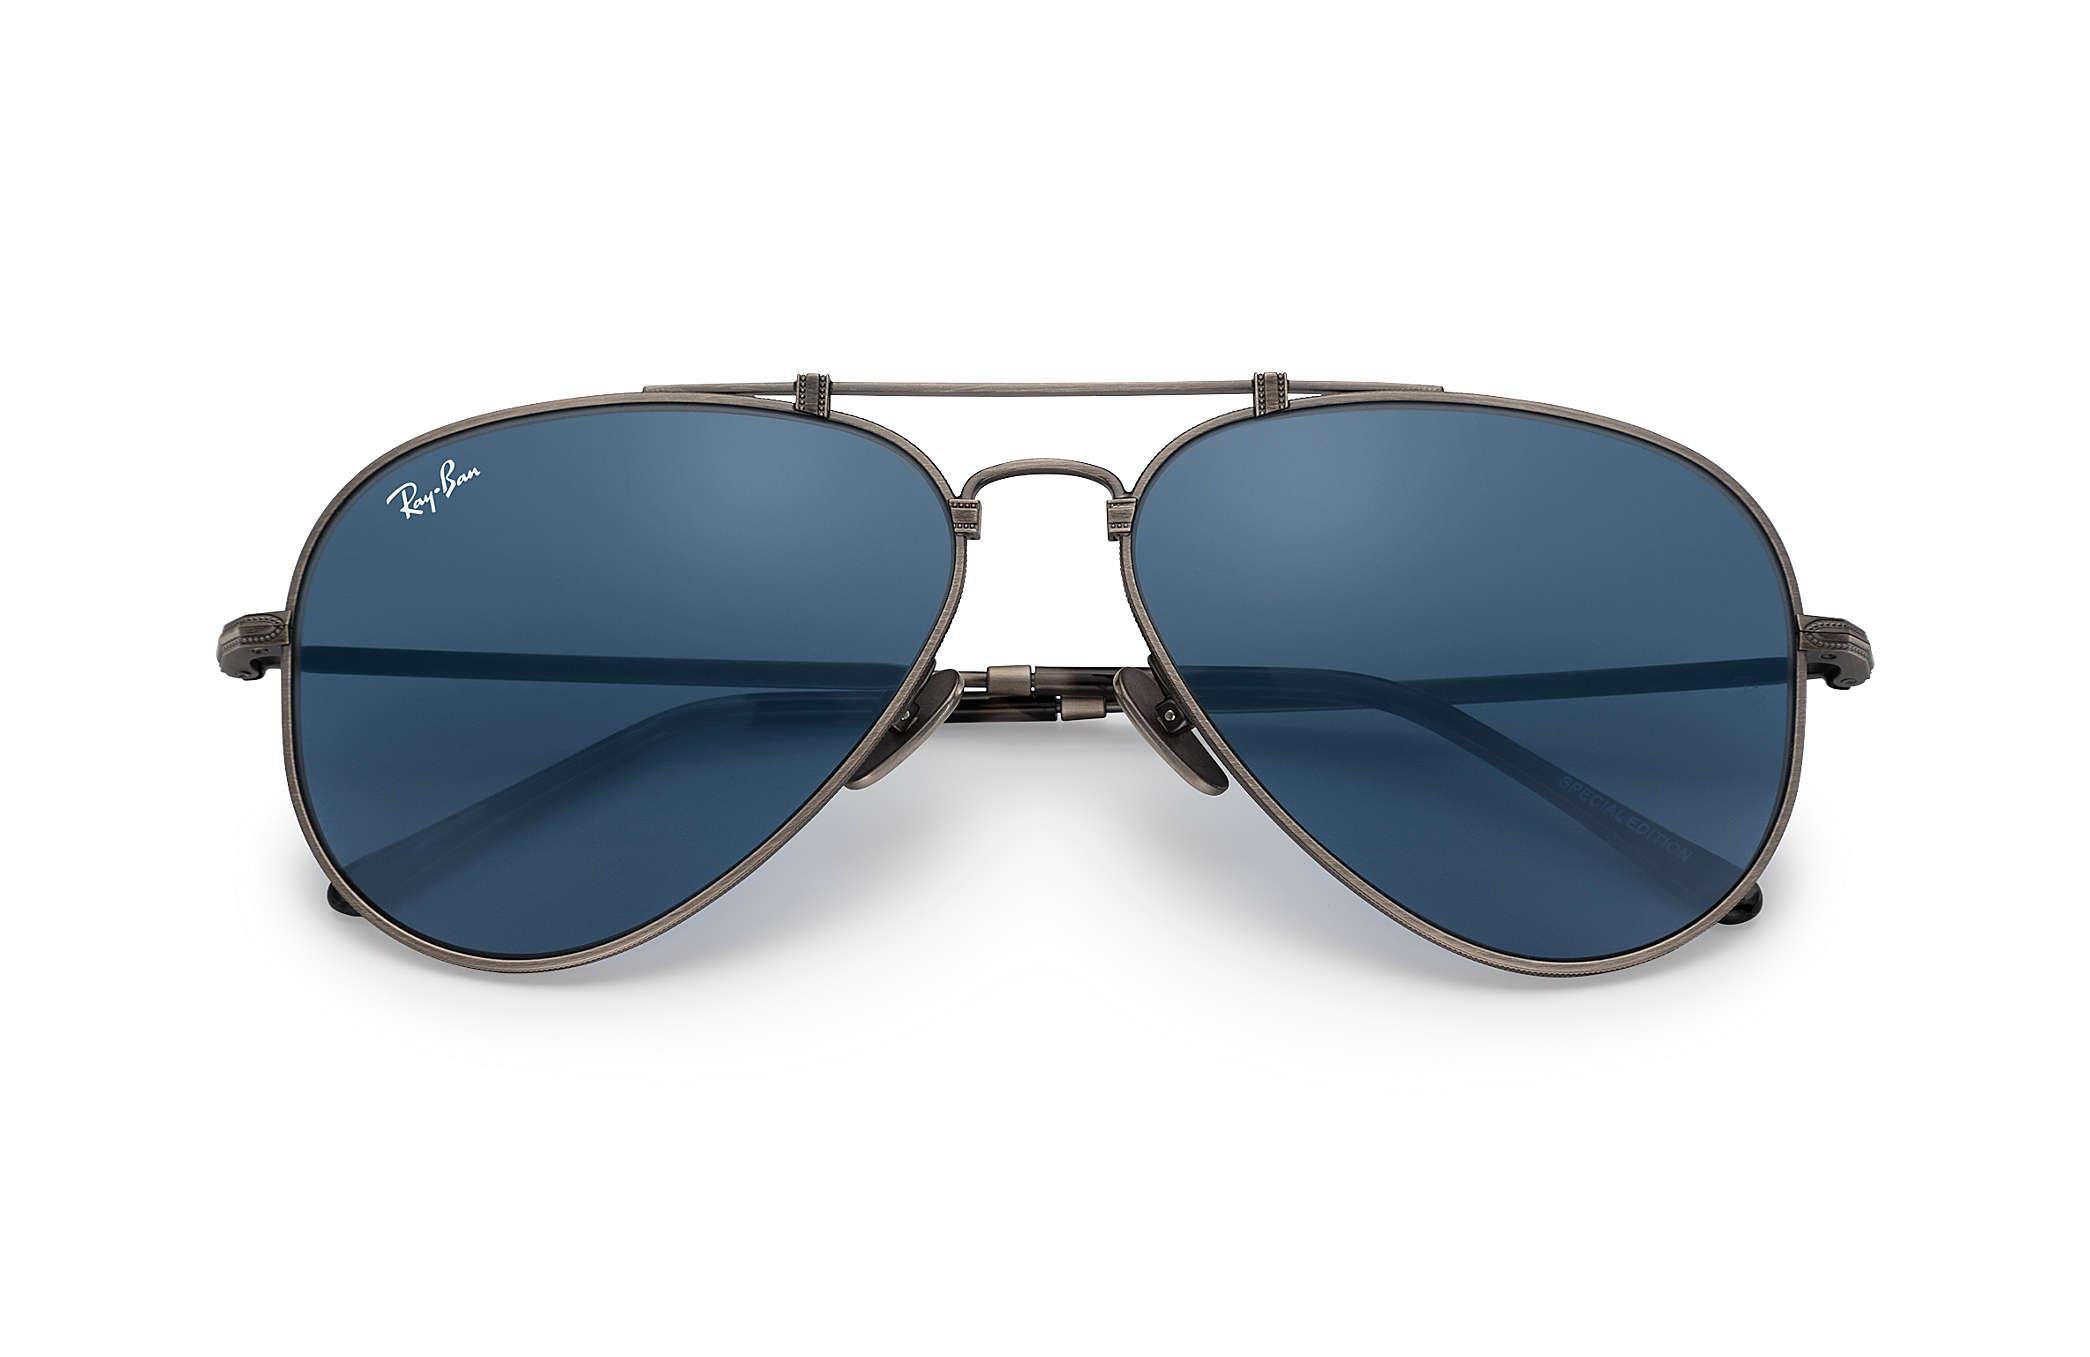 Ray-Ban Rb8125 Aviator Titanium in Brown/Blue (Blue) - Lyst